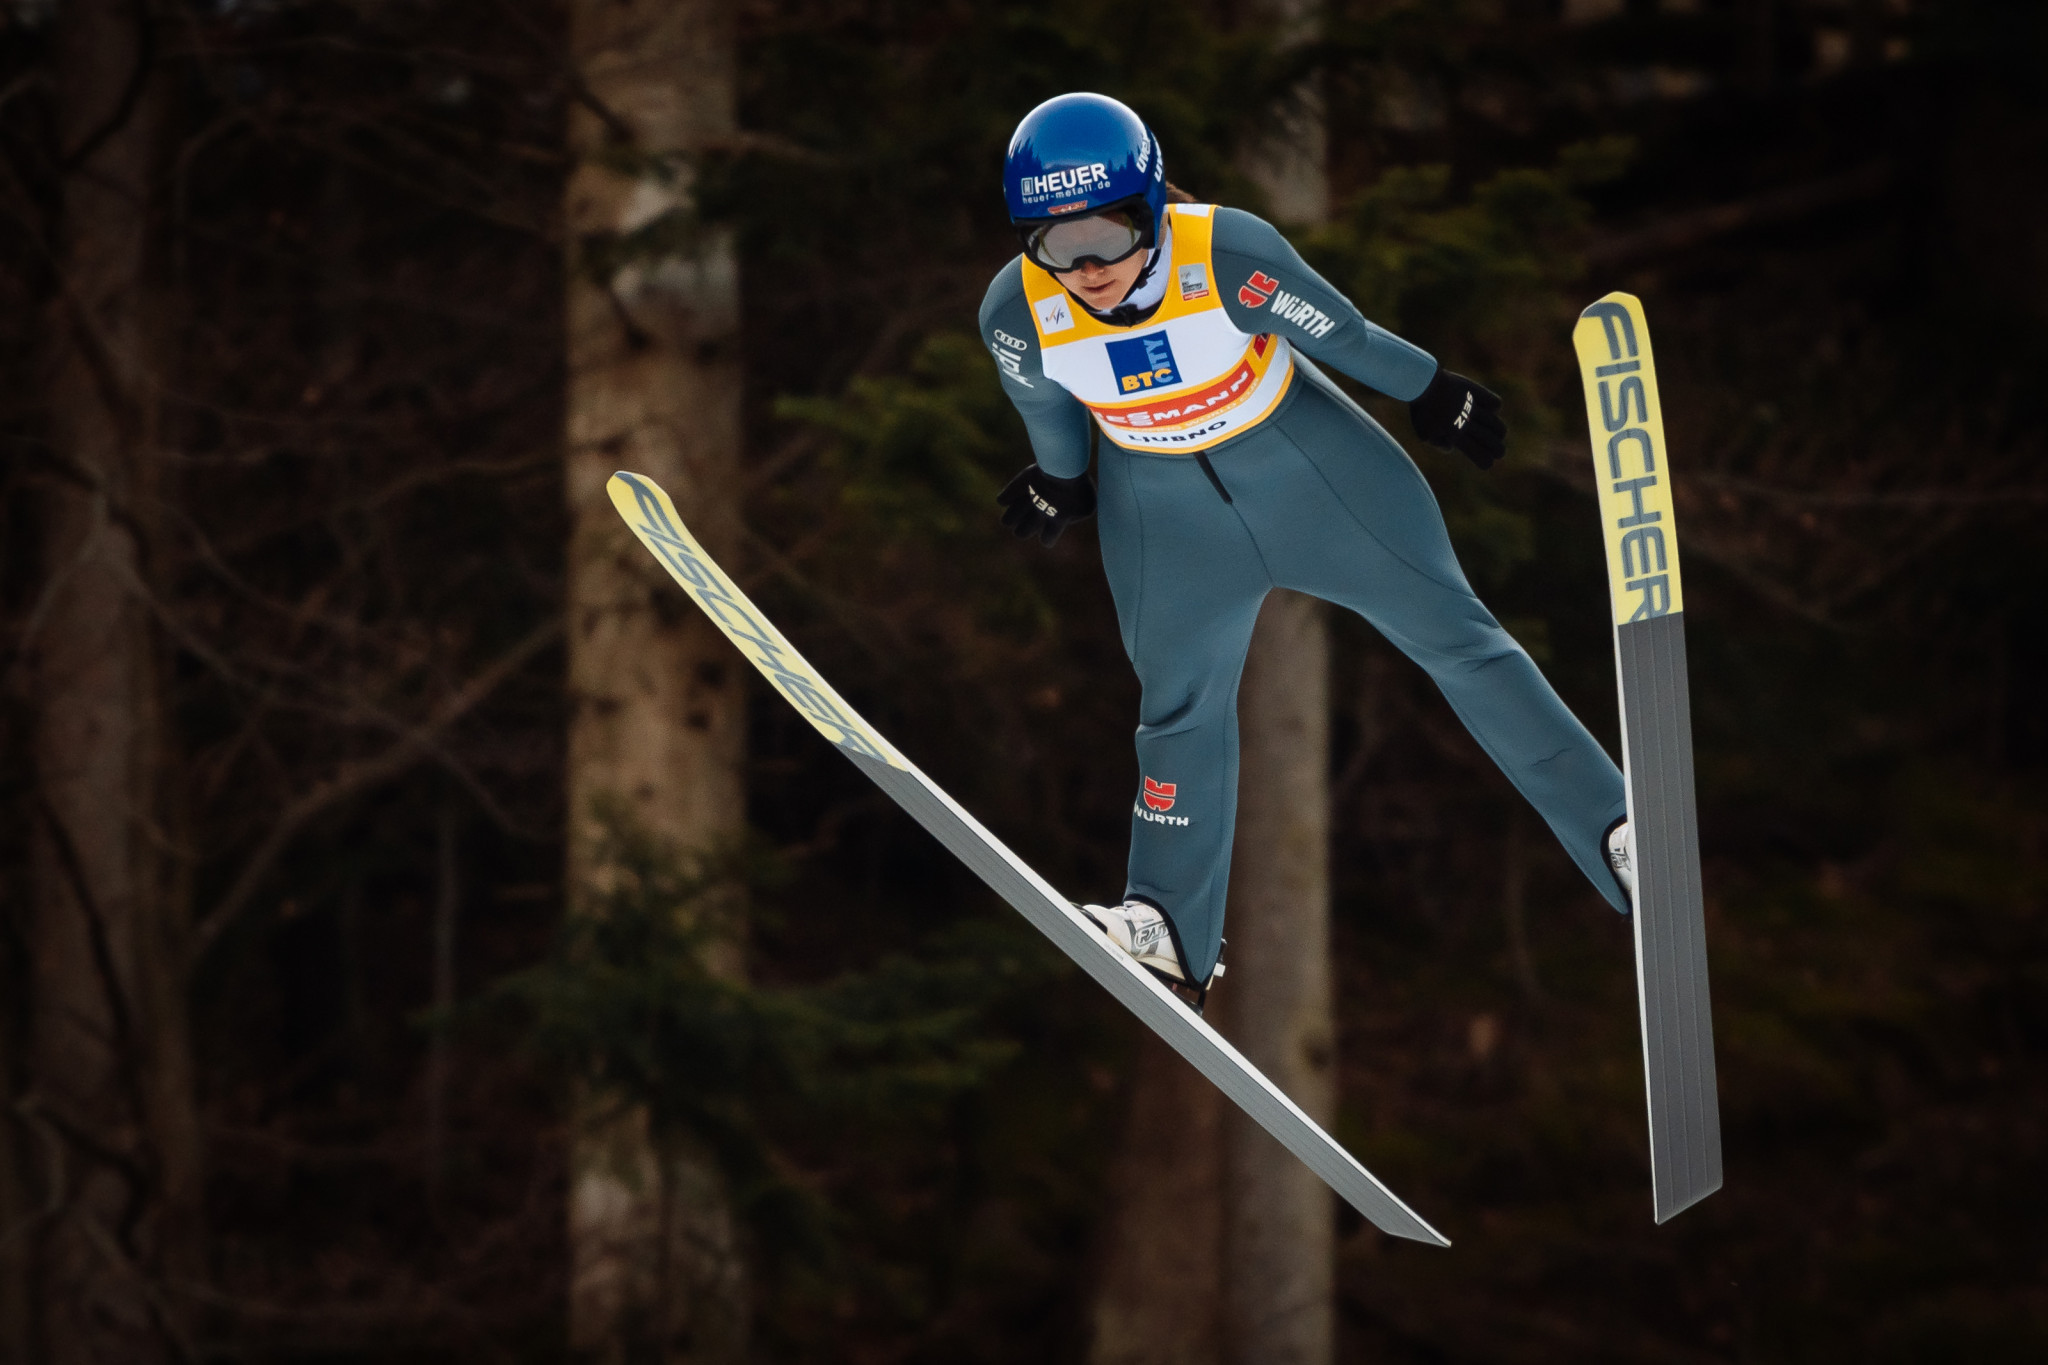 Germany and Austria claim team victories at FIS Ski Jumping World Cup